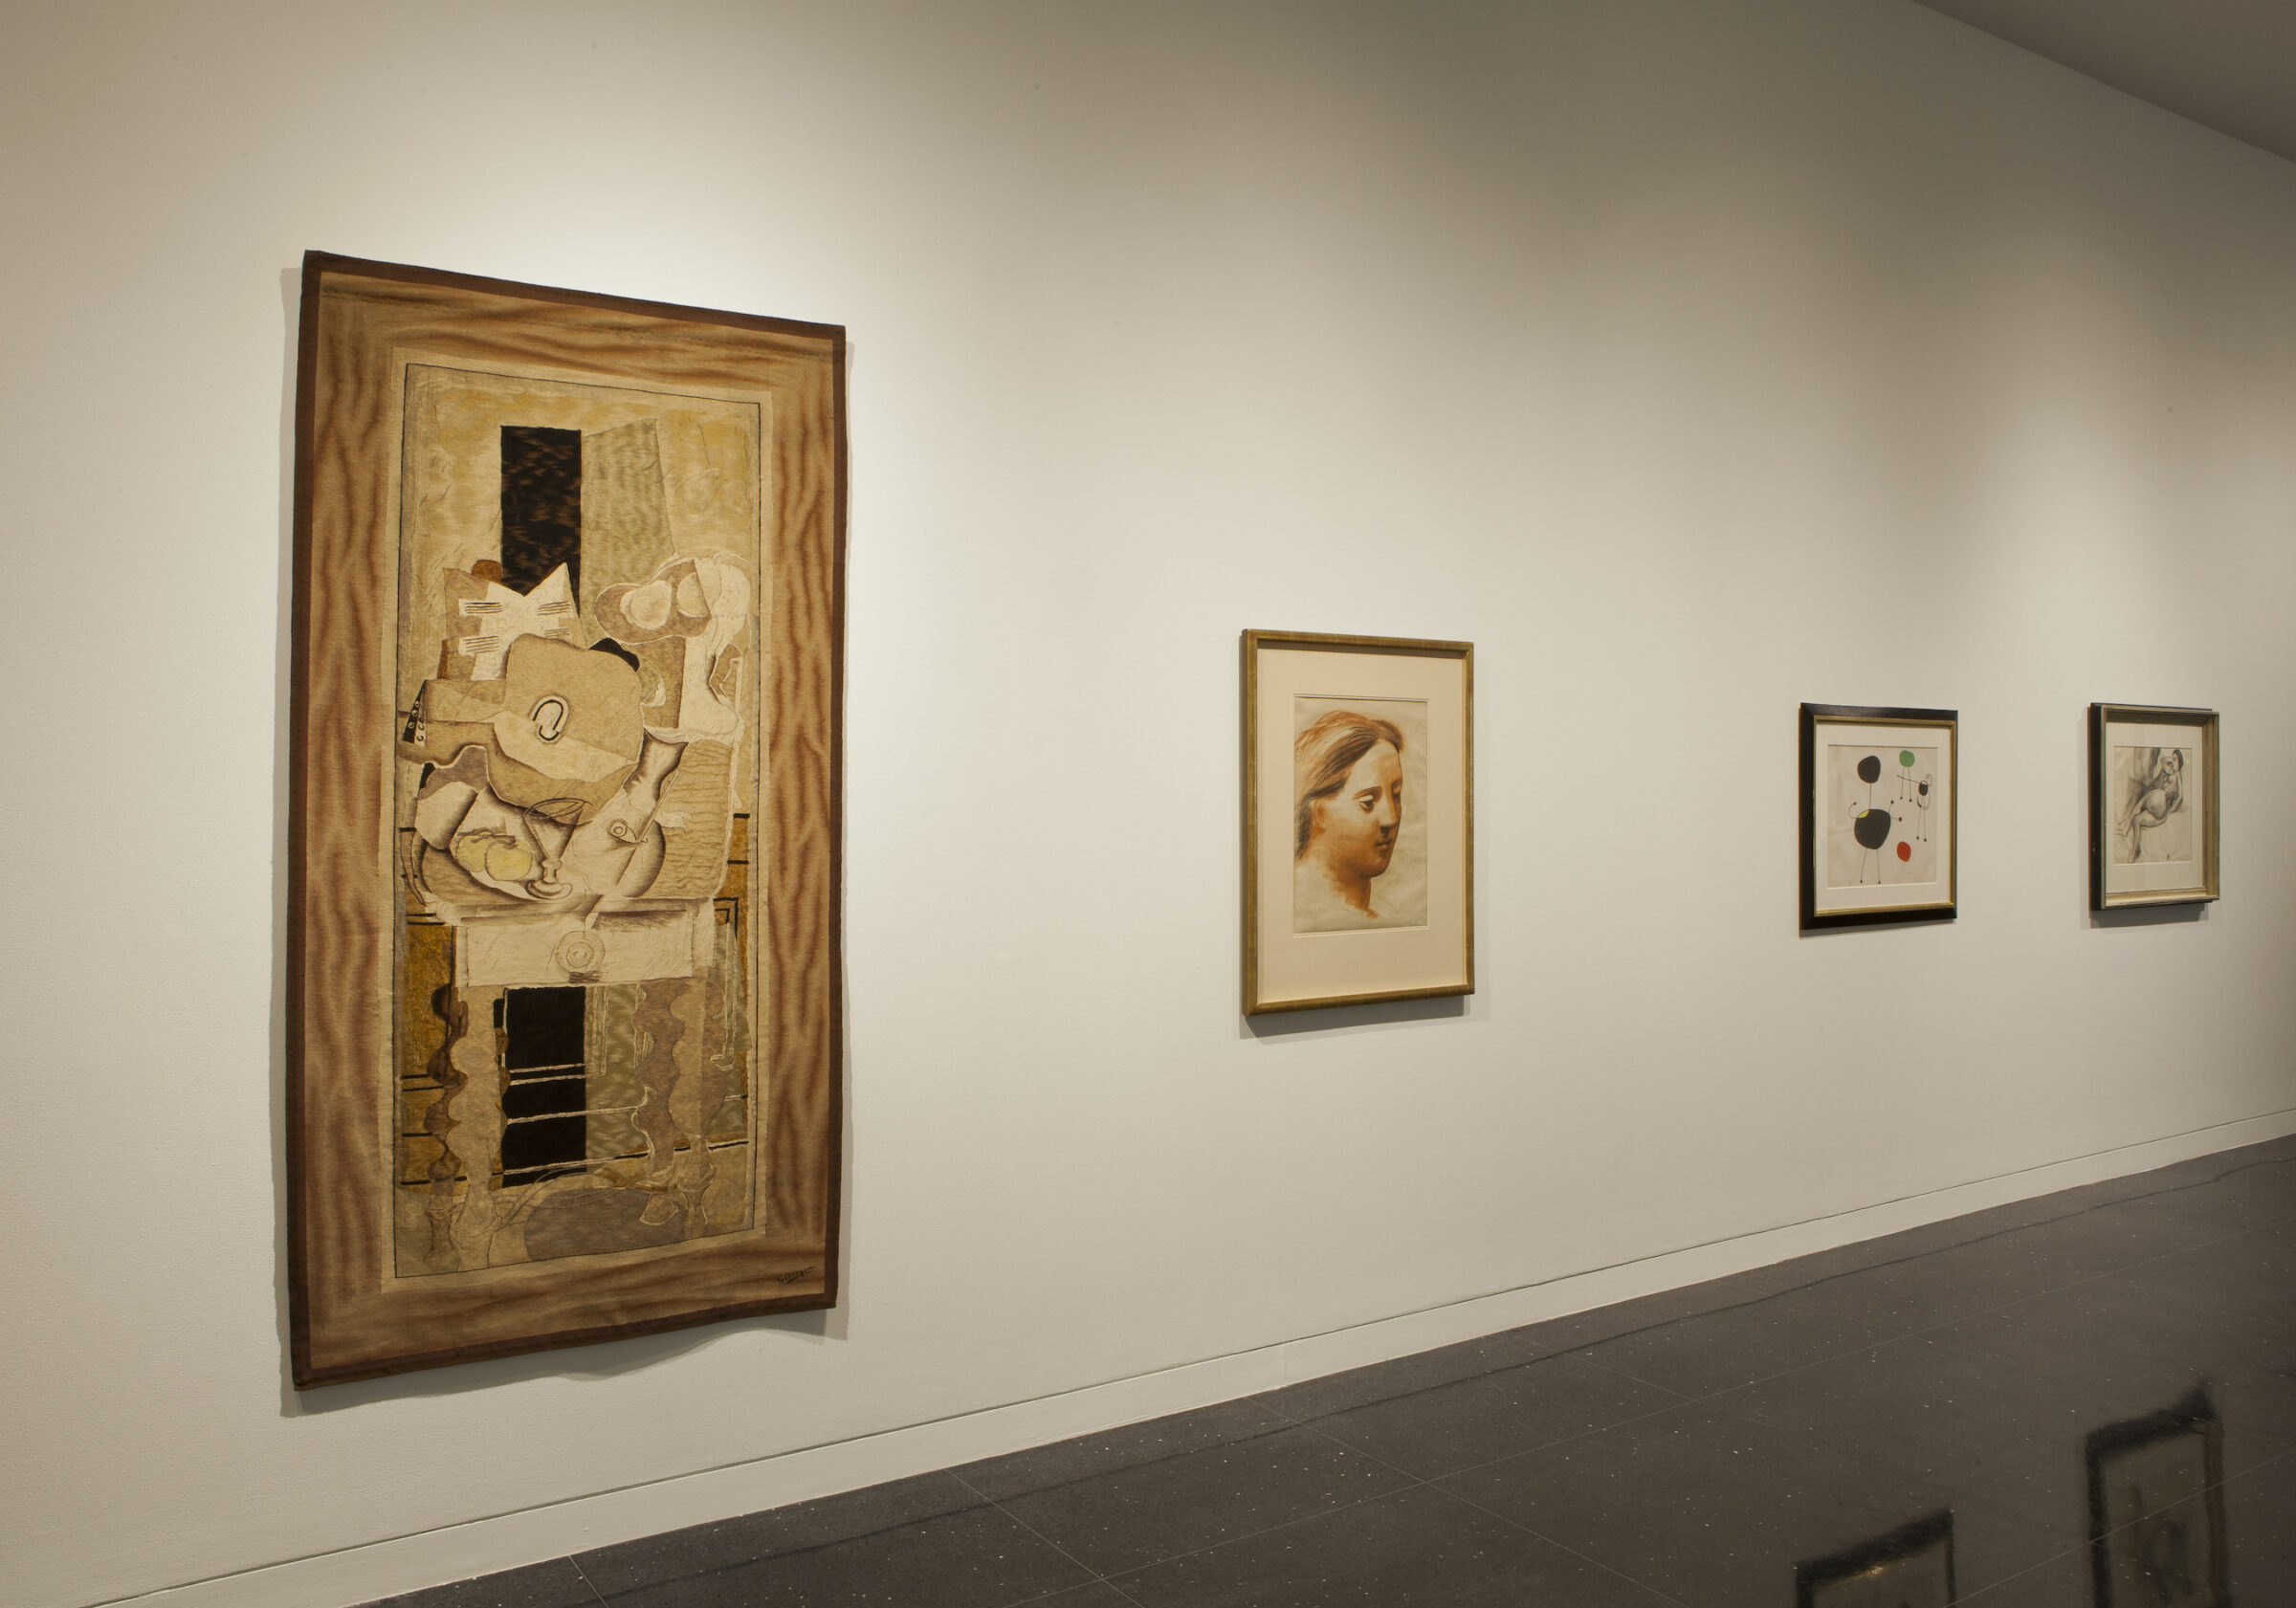 Soft lit, white walled gallery featuring a brown and beige tapestry reproduction of a Braque still life, a picasso drawing of a woman's head and neck, and an abstract picture by Joan Miro, hanging in a horizontal line.